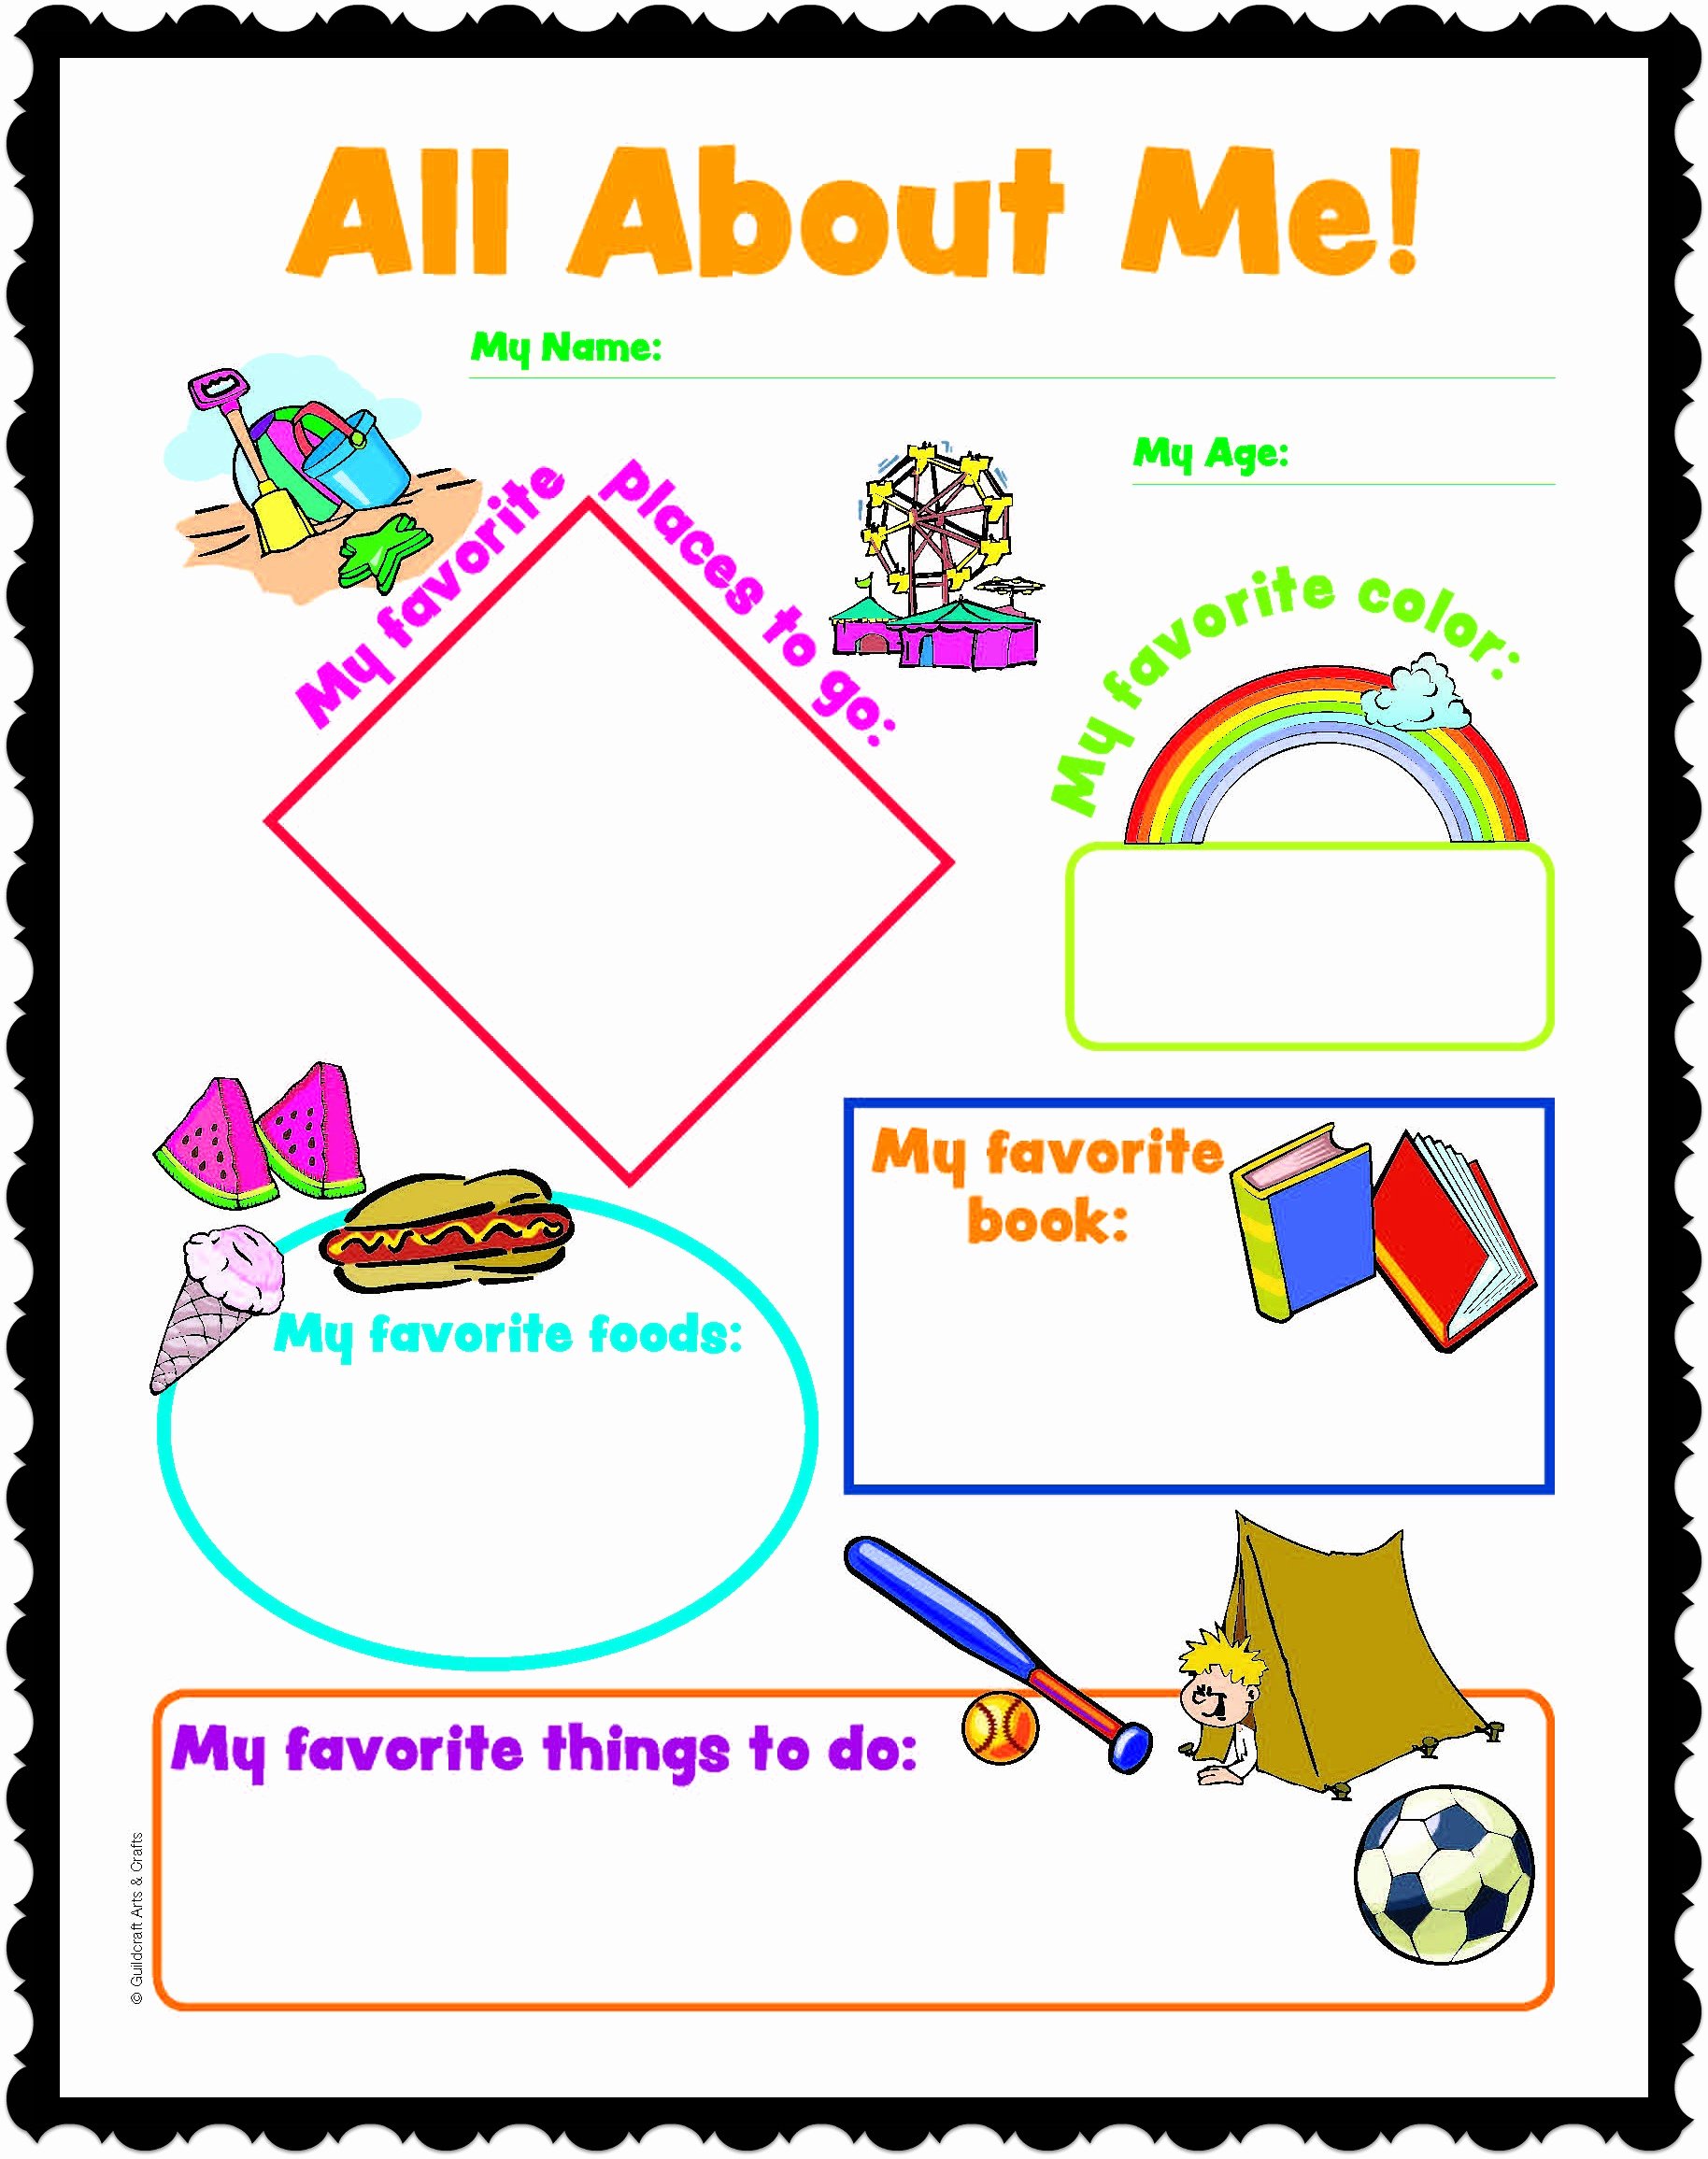 All About Me Worksheet Pdf Elegant All About Me Worksheetstake the Pen